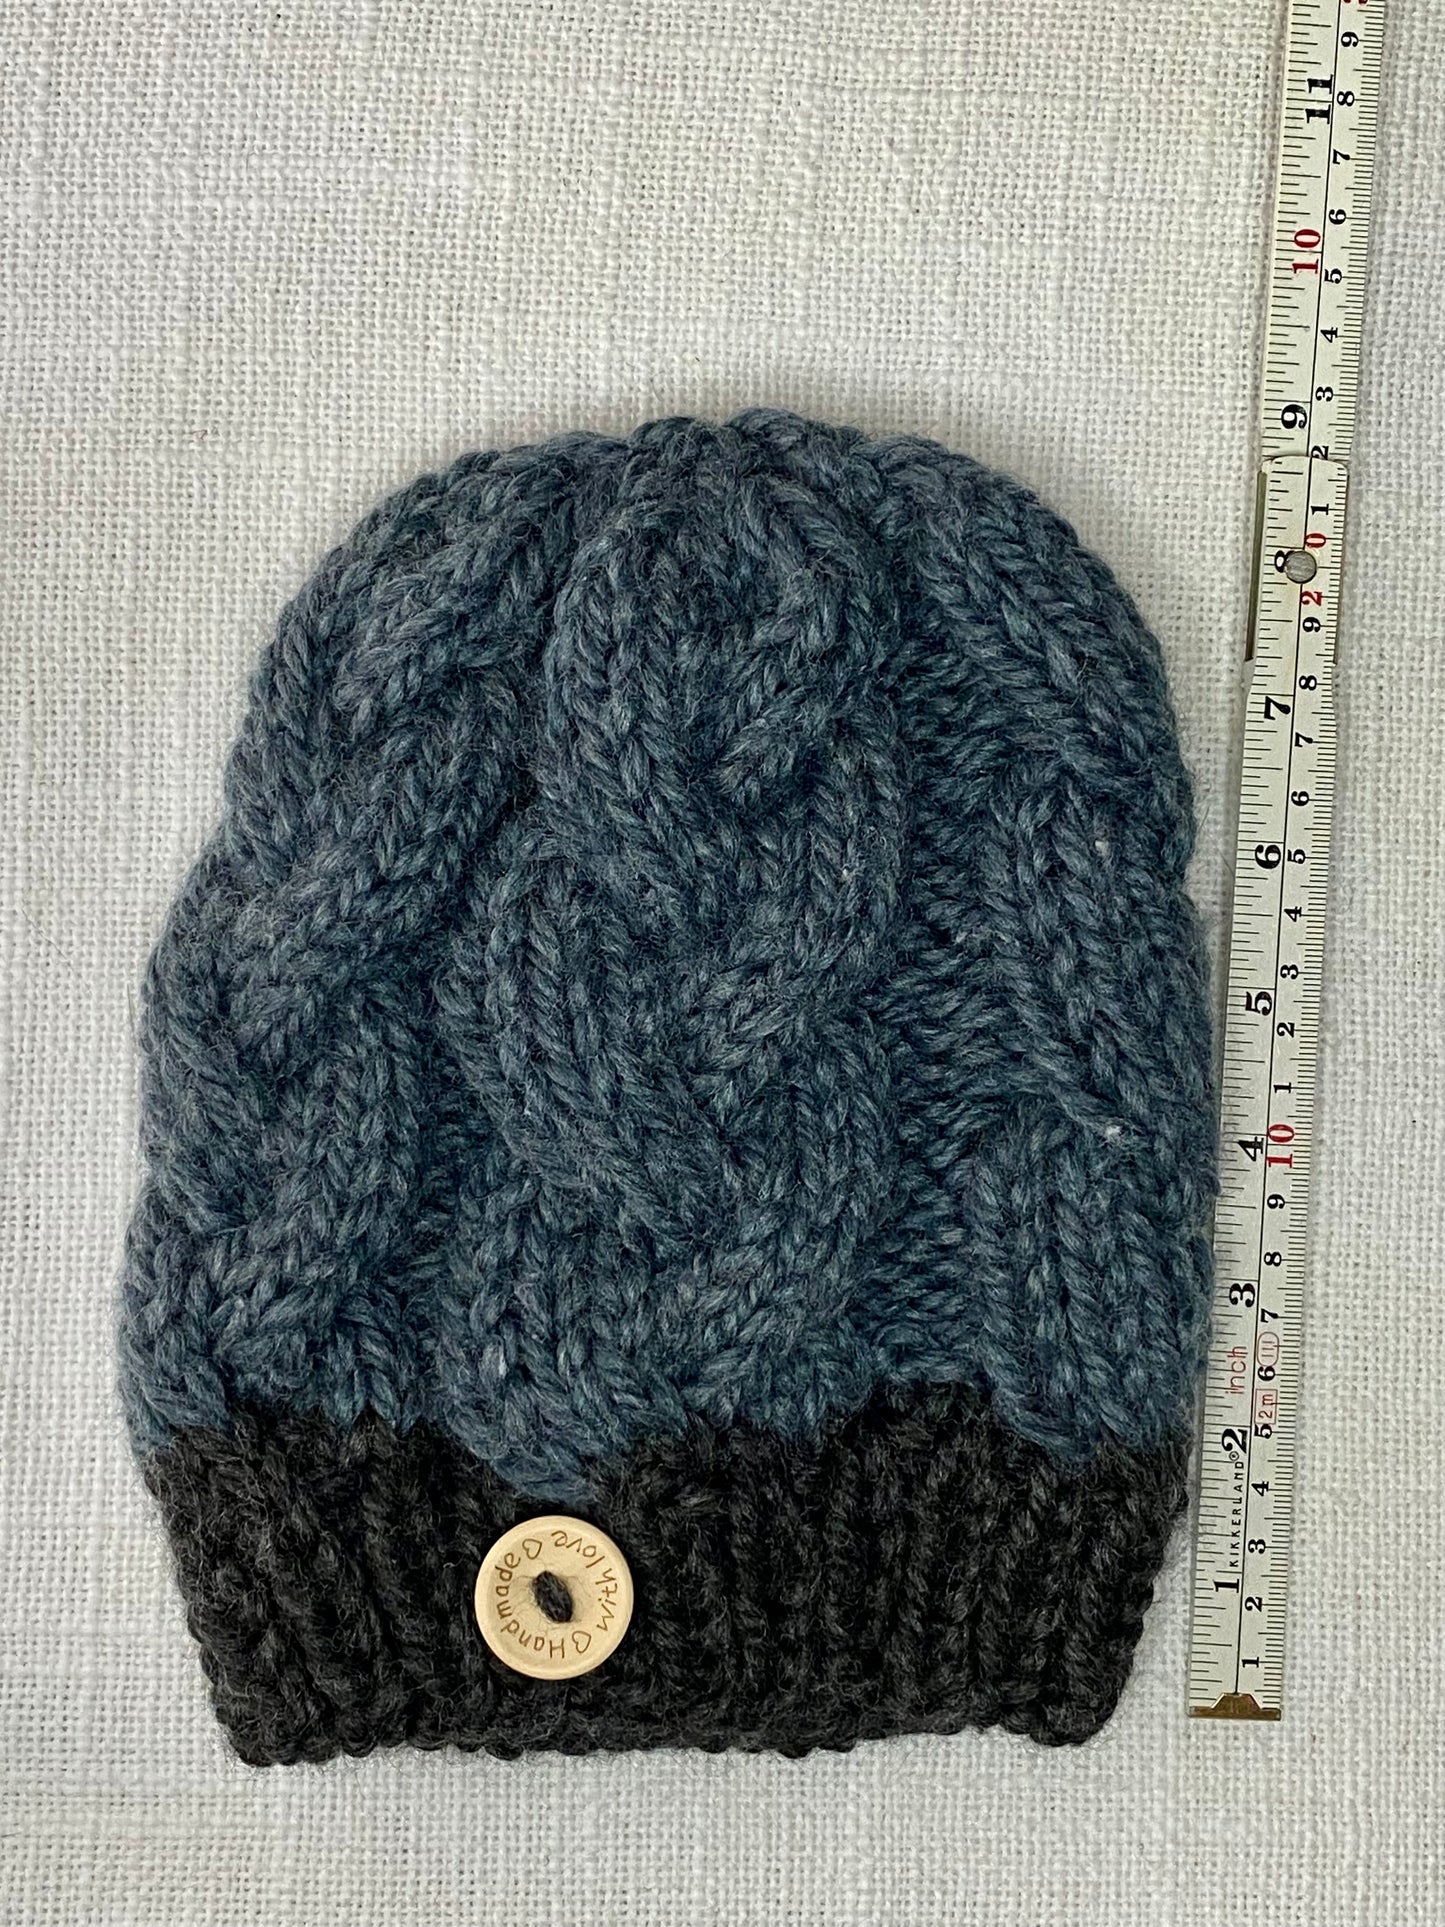 Cozy Cables Hat in Denim and Raven- Recycled Synthetic Fiber blend